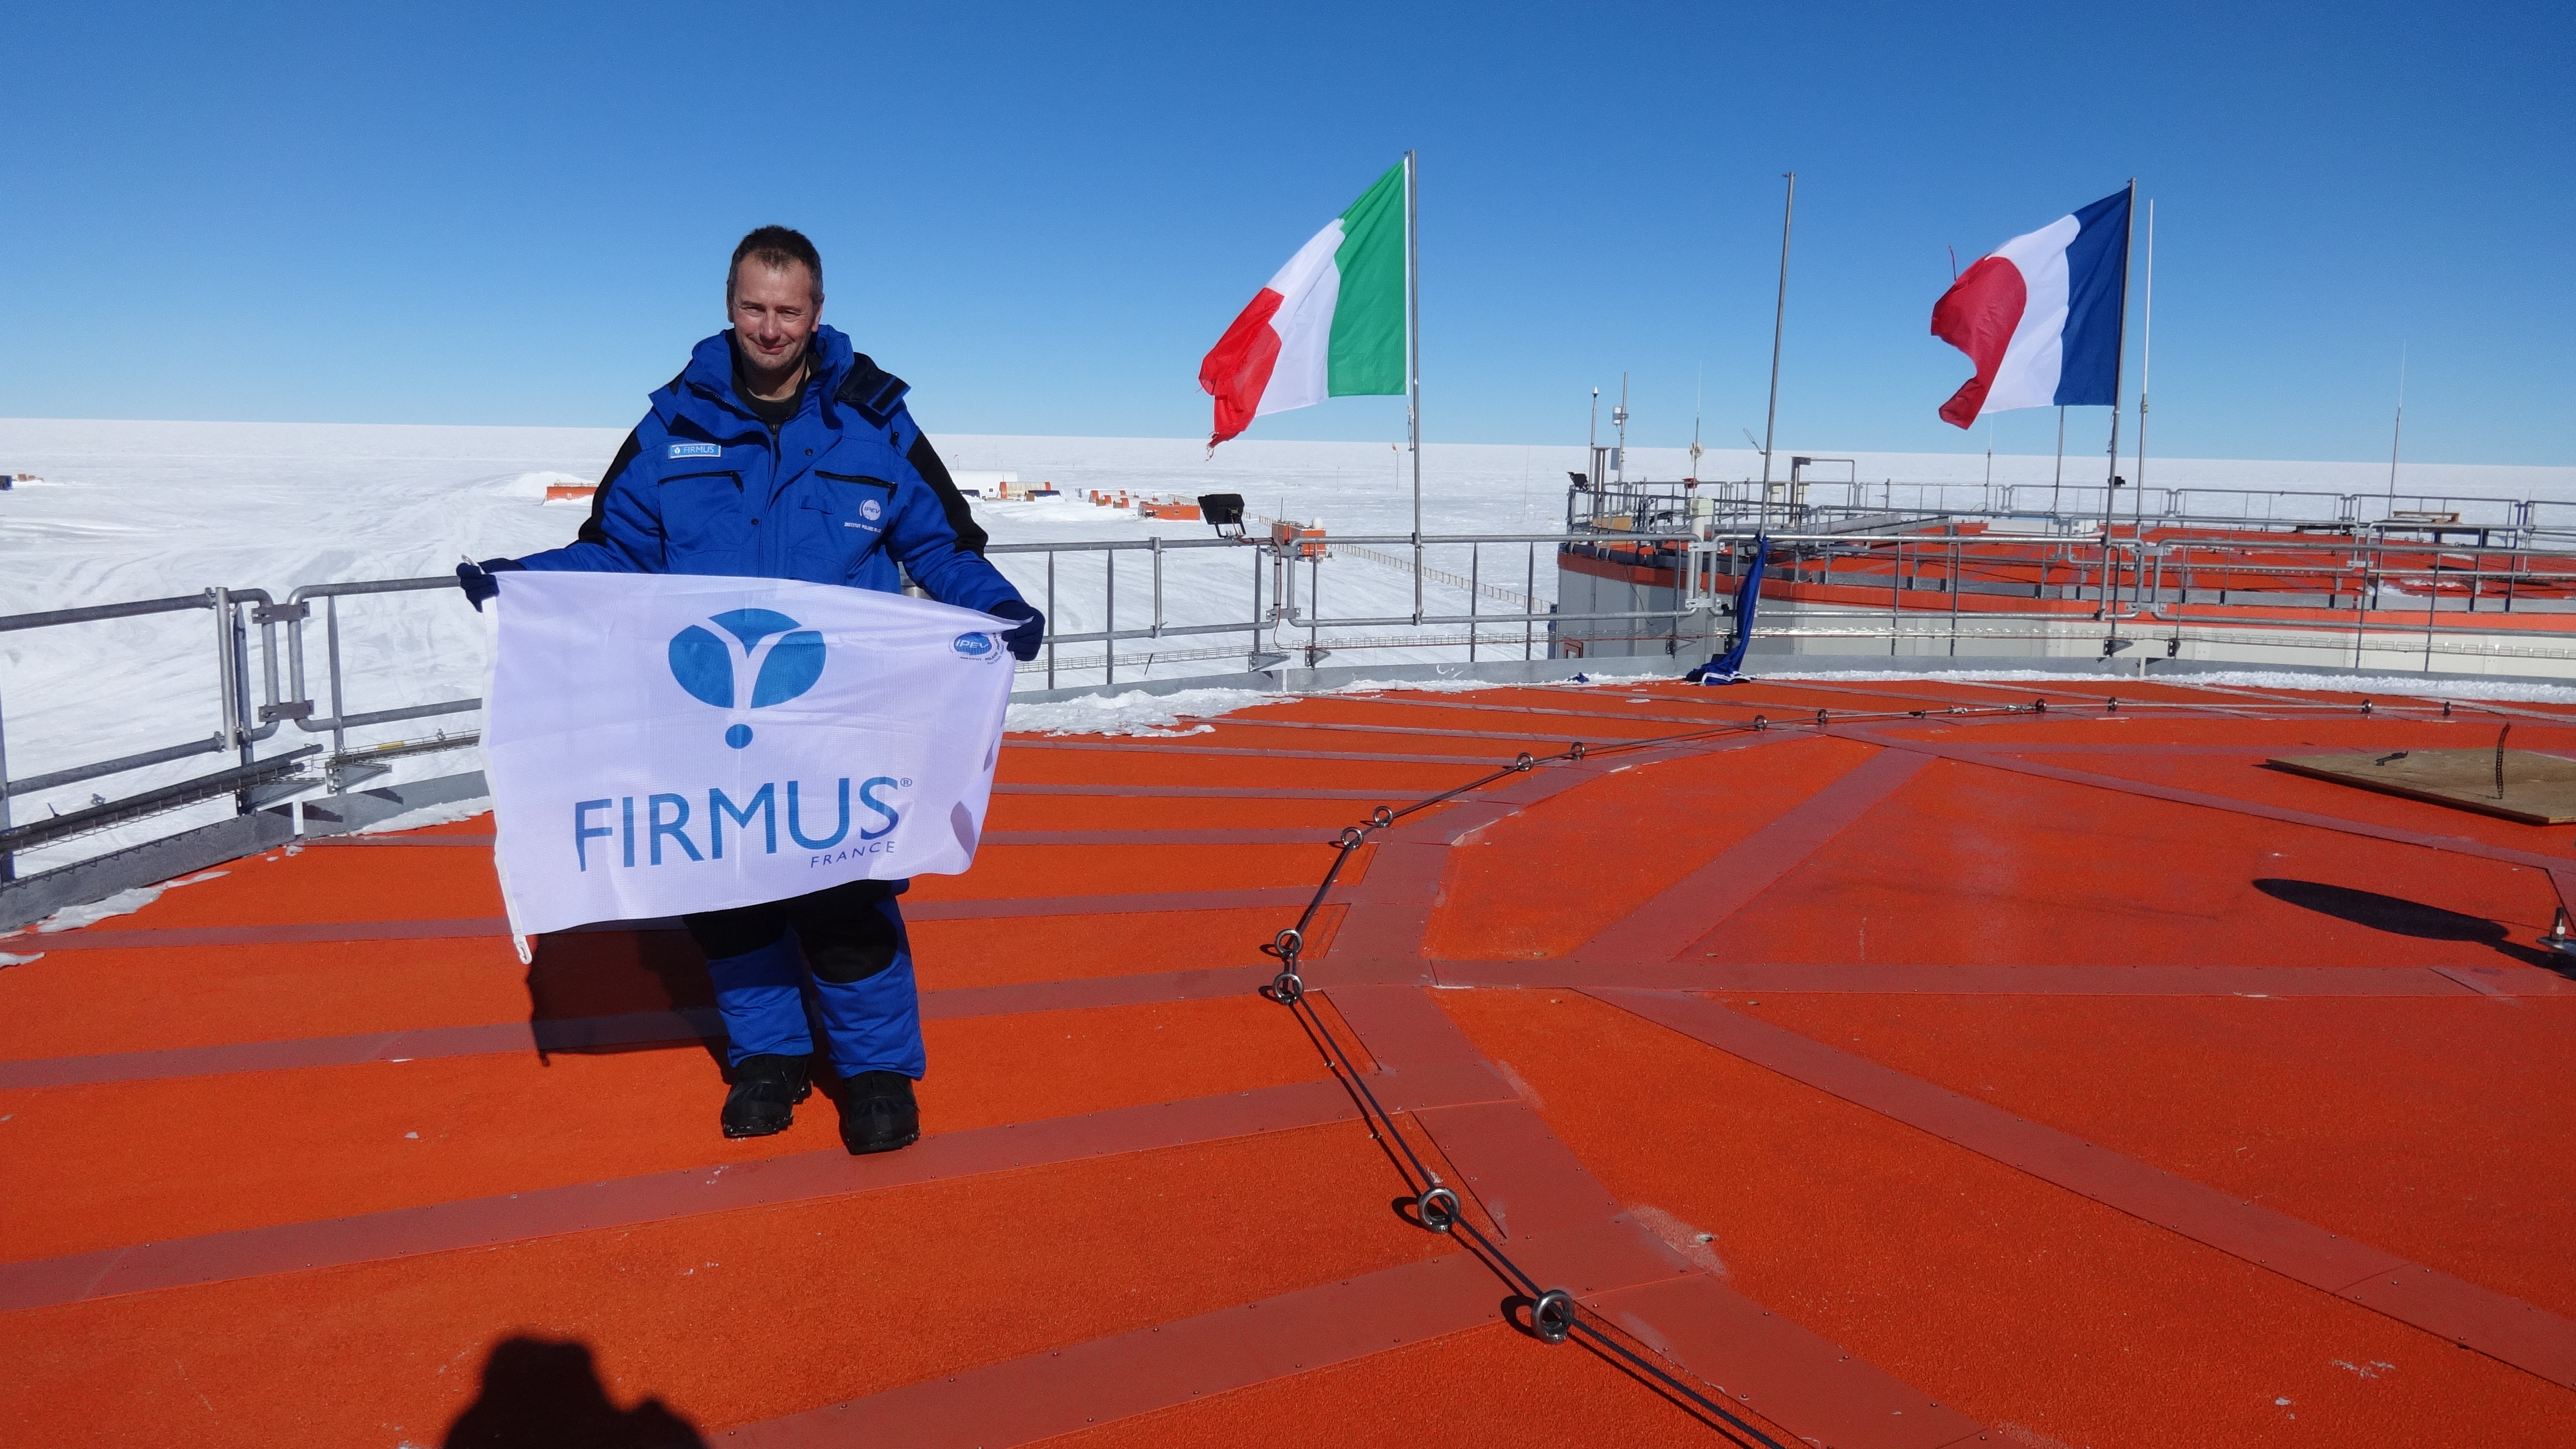 New Mission For FIRMUS In Antarctica